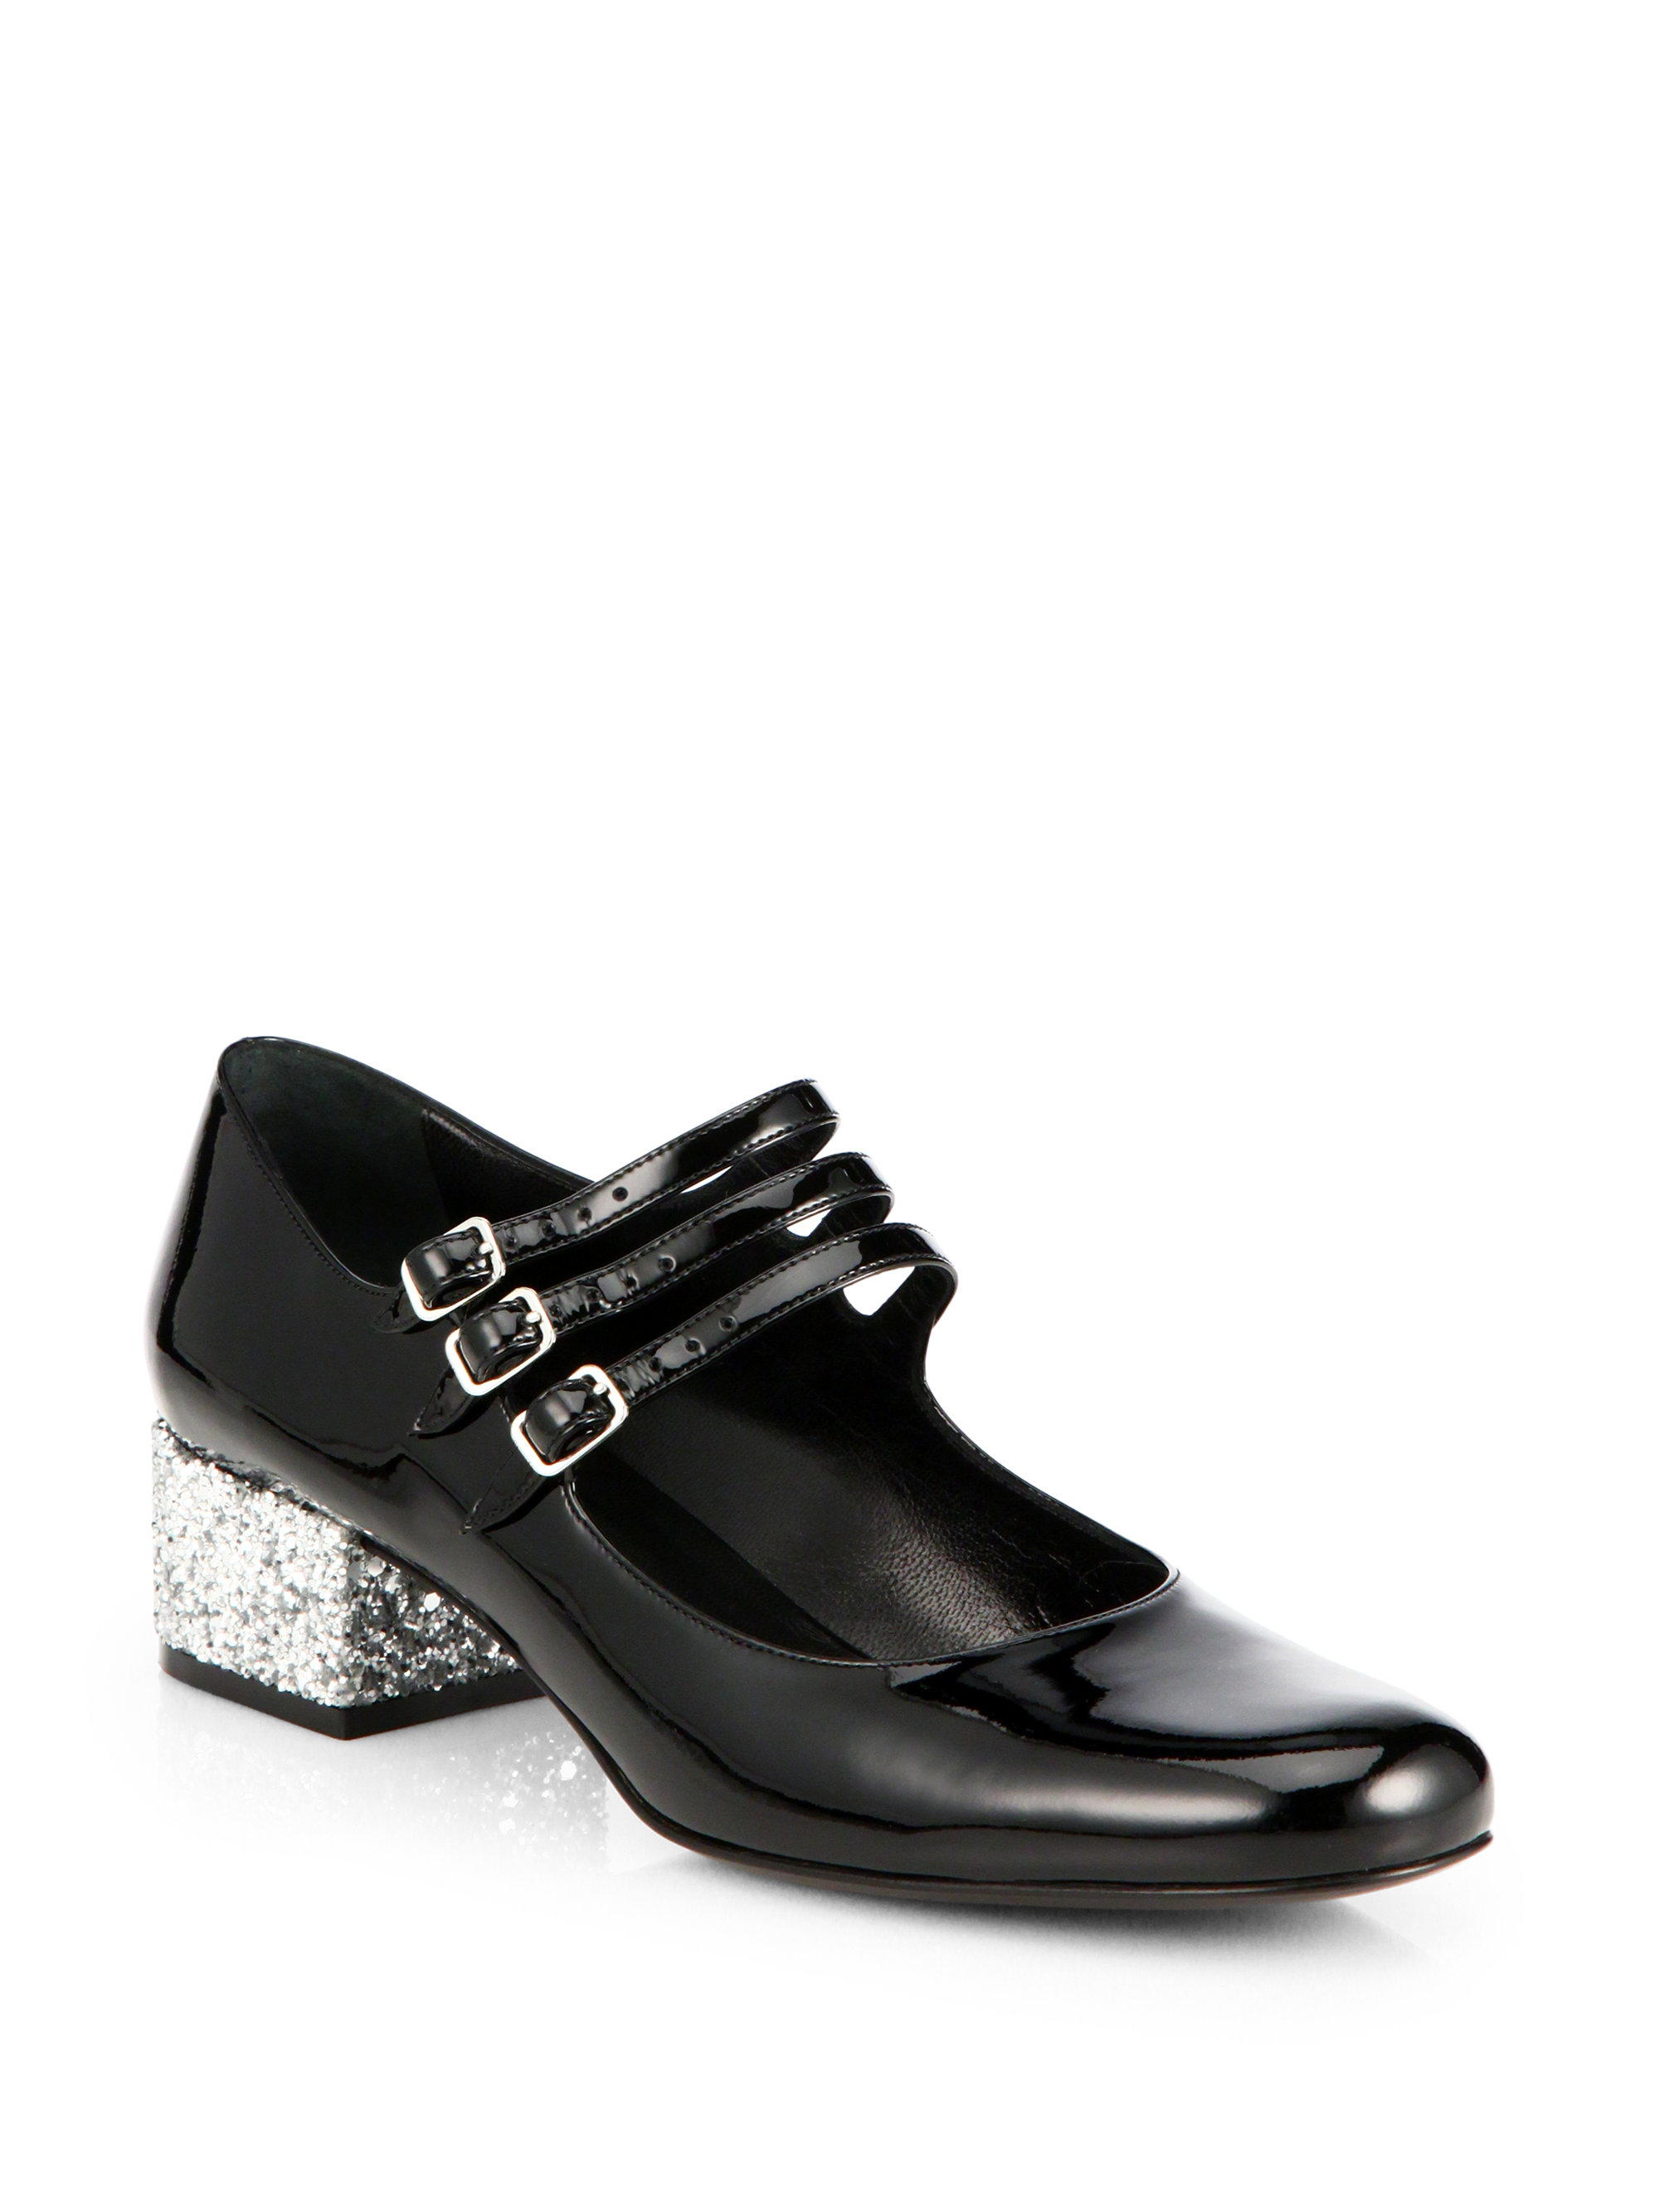 Saint Laurent Glitter-Heel Patent Leather Mary Jane Pumps in